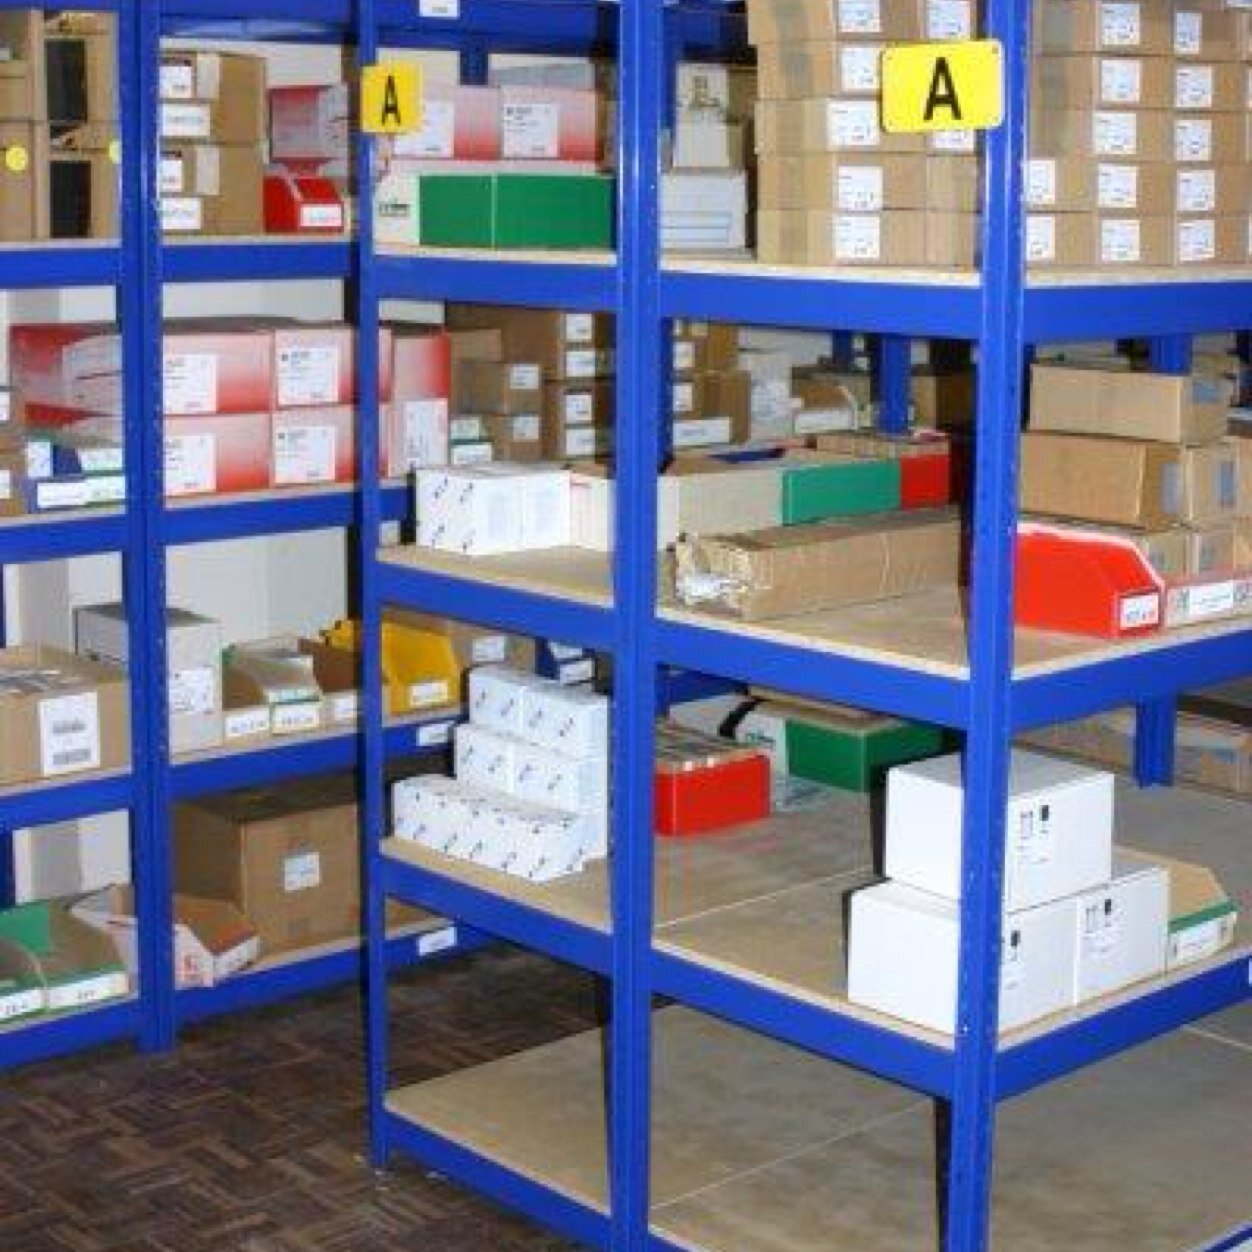 Zamba Shelving is manufactured by Storage Solutions Ltd for trade Storage Equipment Dealers, Retailers & Hardware Outlets for re-sale bulk or retail flat-packs